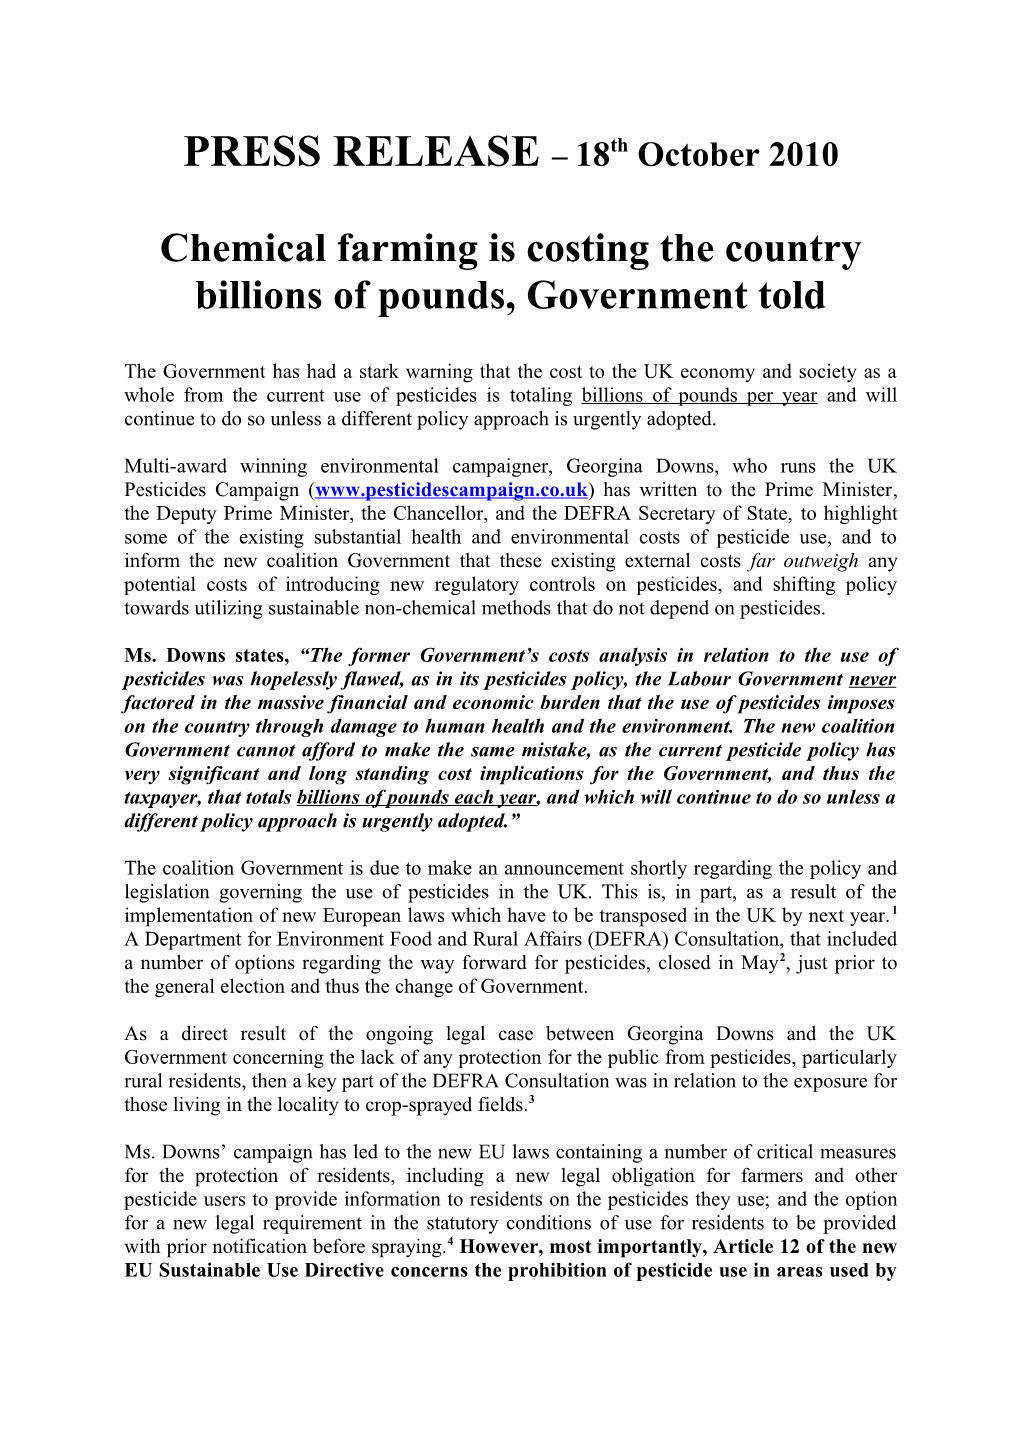 Chemical Farming Is Costing the Country Billions of Pounds, Government Told